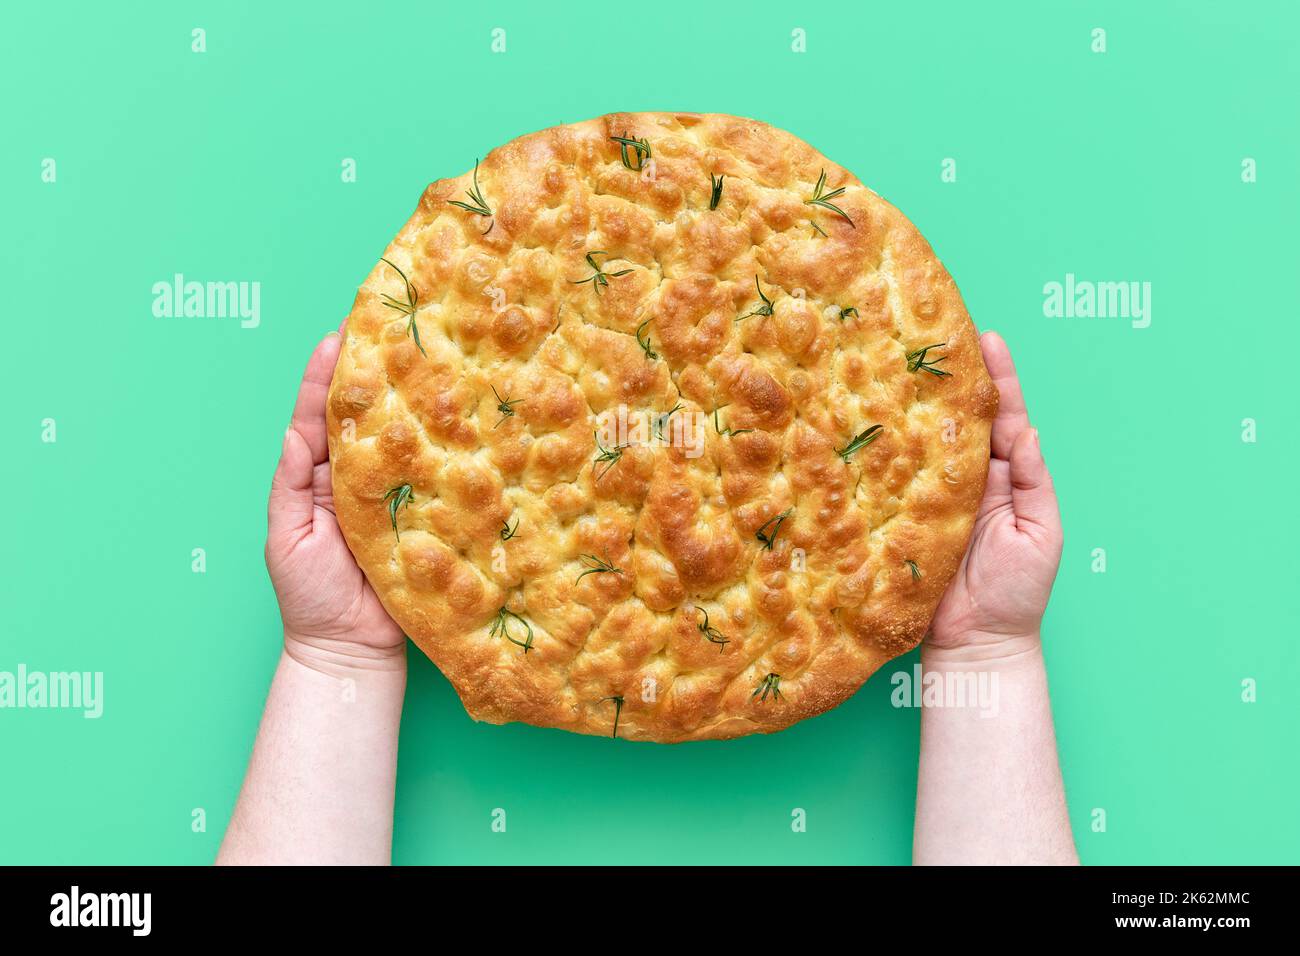 Woman's hands hold a freshly baked rosemary focaccia above a green table. Top view with homemade focaccia with a delicious crust. Stock Photo